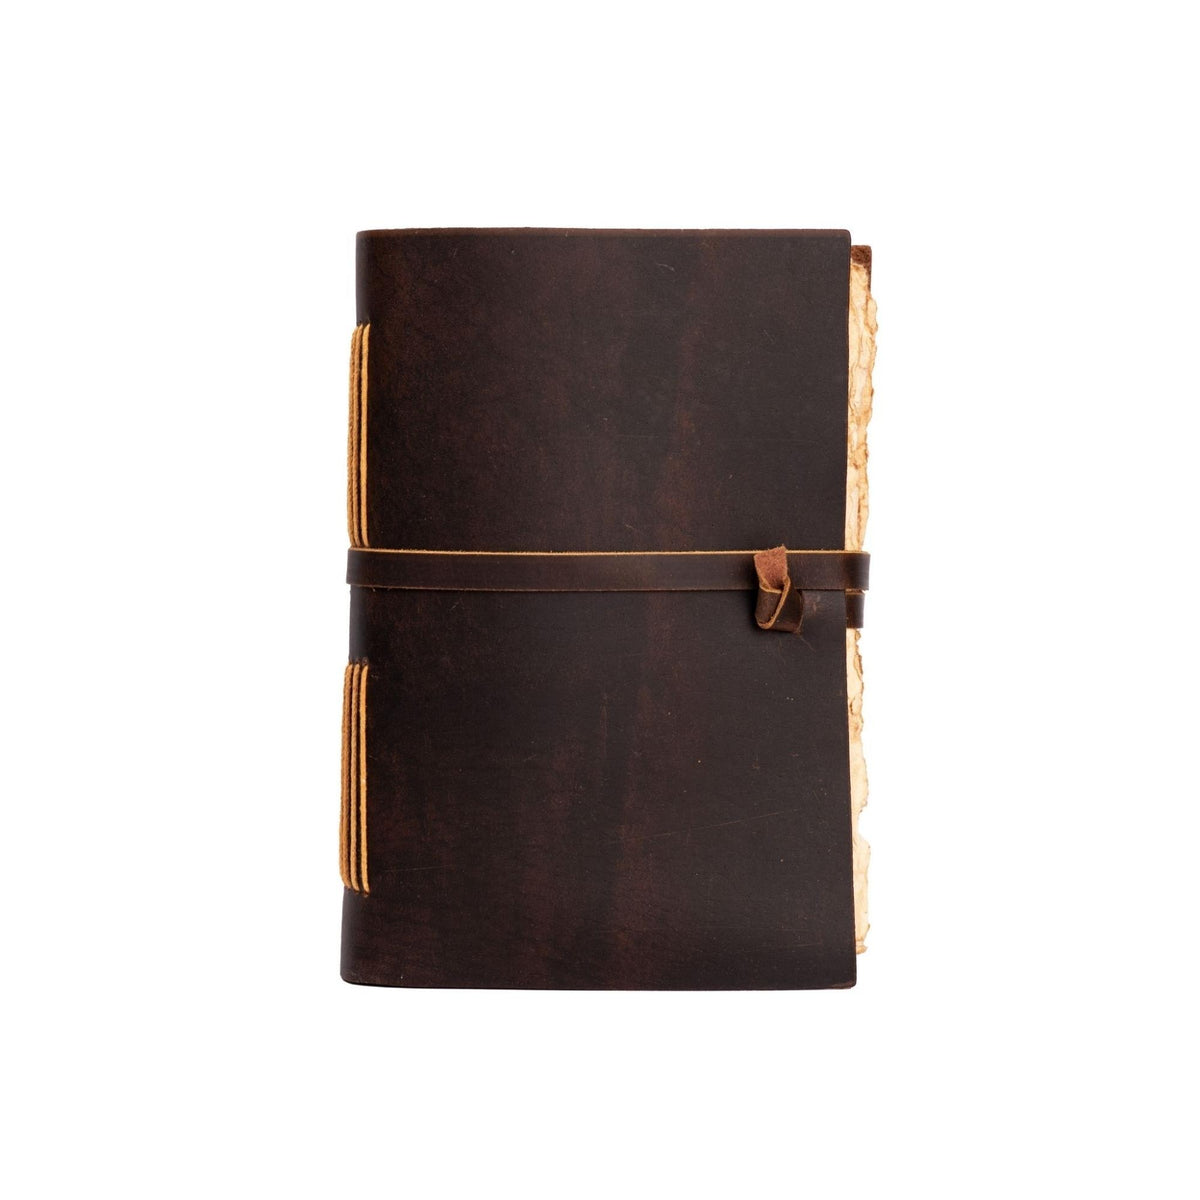 Leather Village chocolate brown colour leather journal with strap